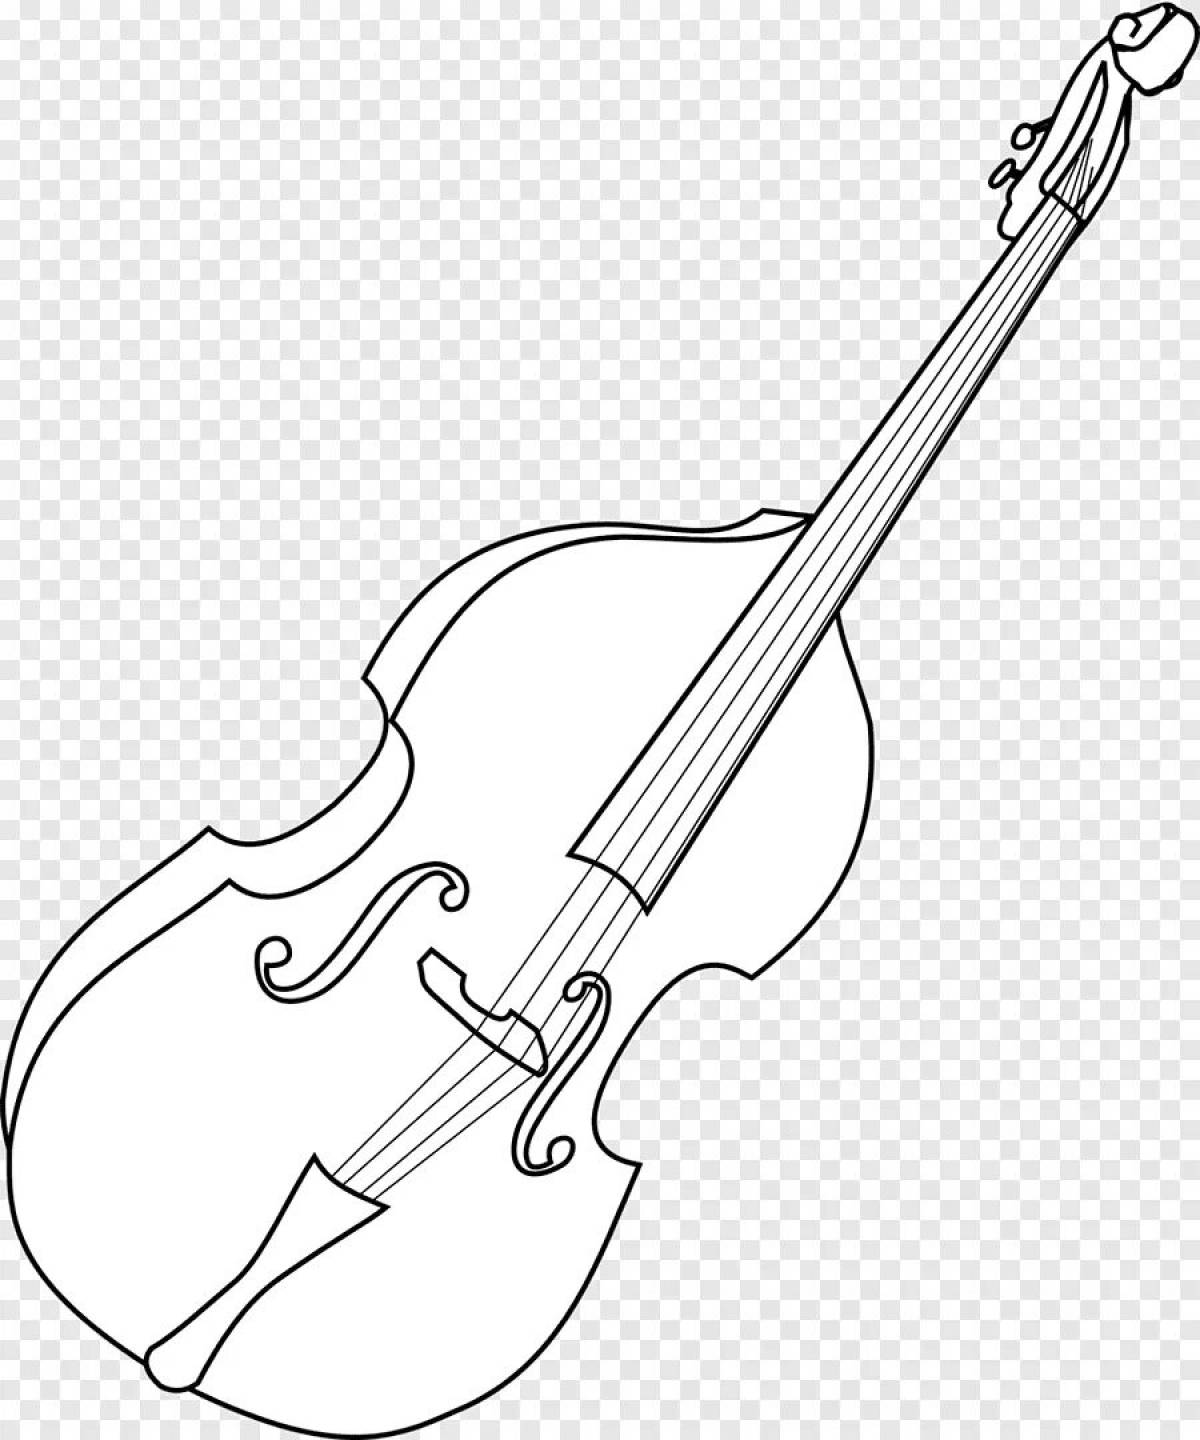 Awesome coloring page of violin for kids